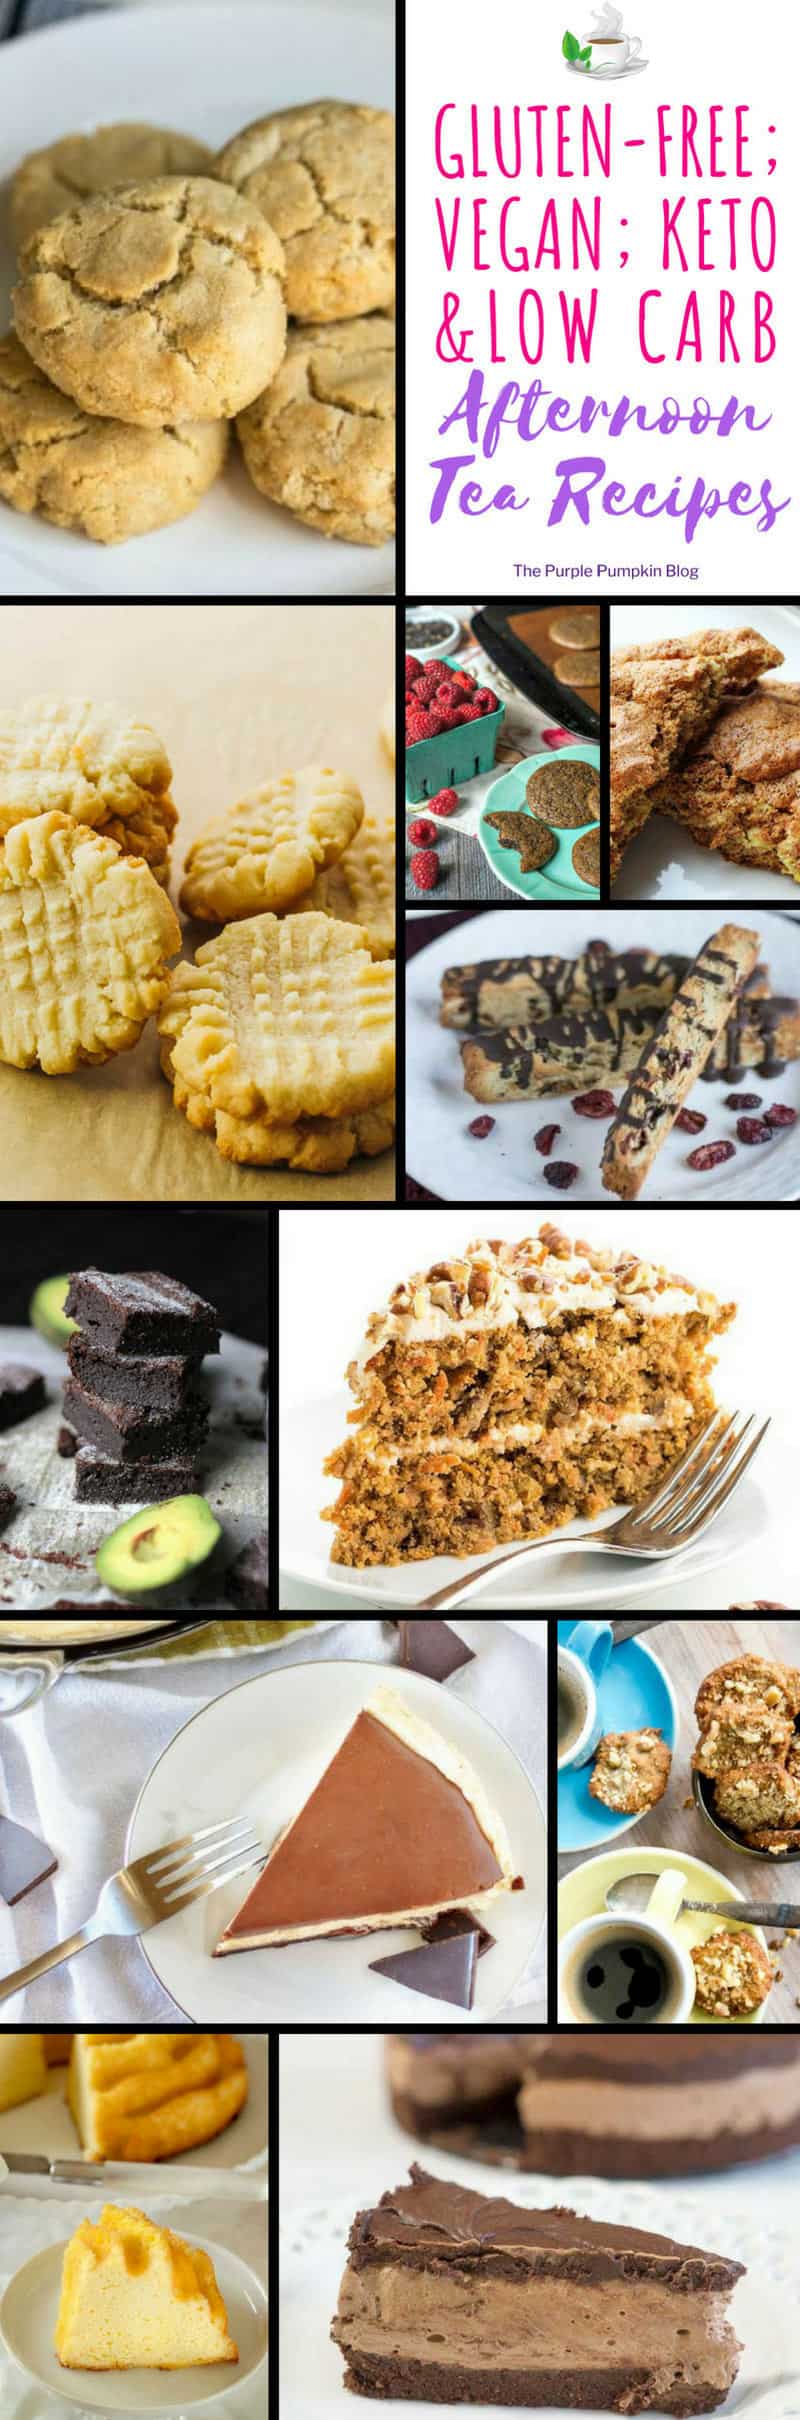 Vegan; Gluten-Free; Keto; Low Carb Afternoon Tea Recipes - don't miss out on afternoon tea if you have special dietary requirements - lots of delicious recipes here!